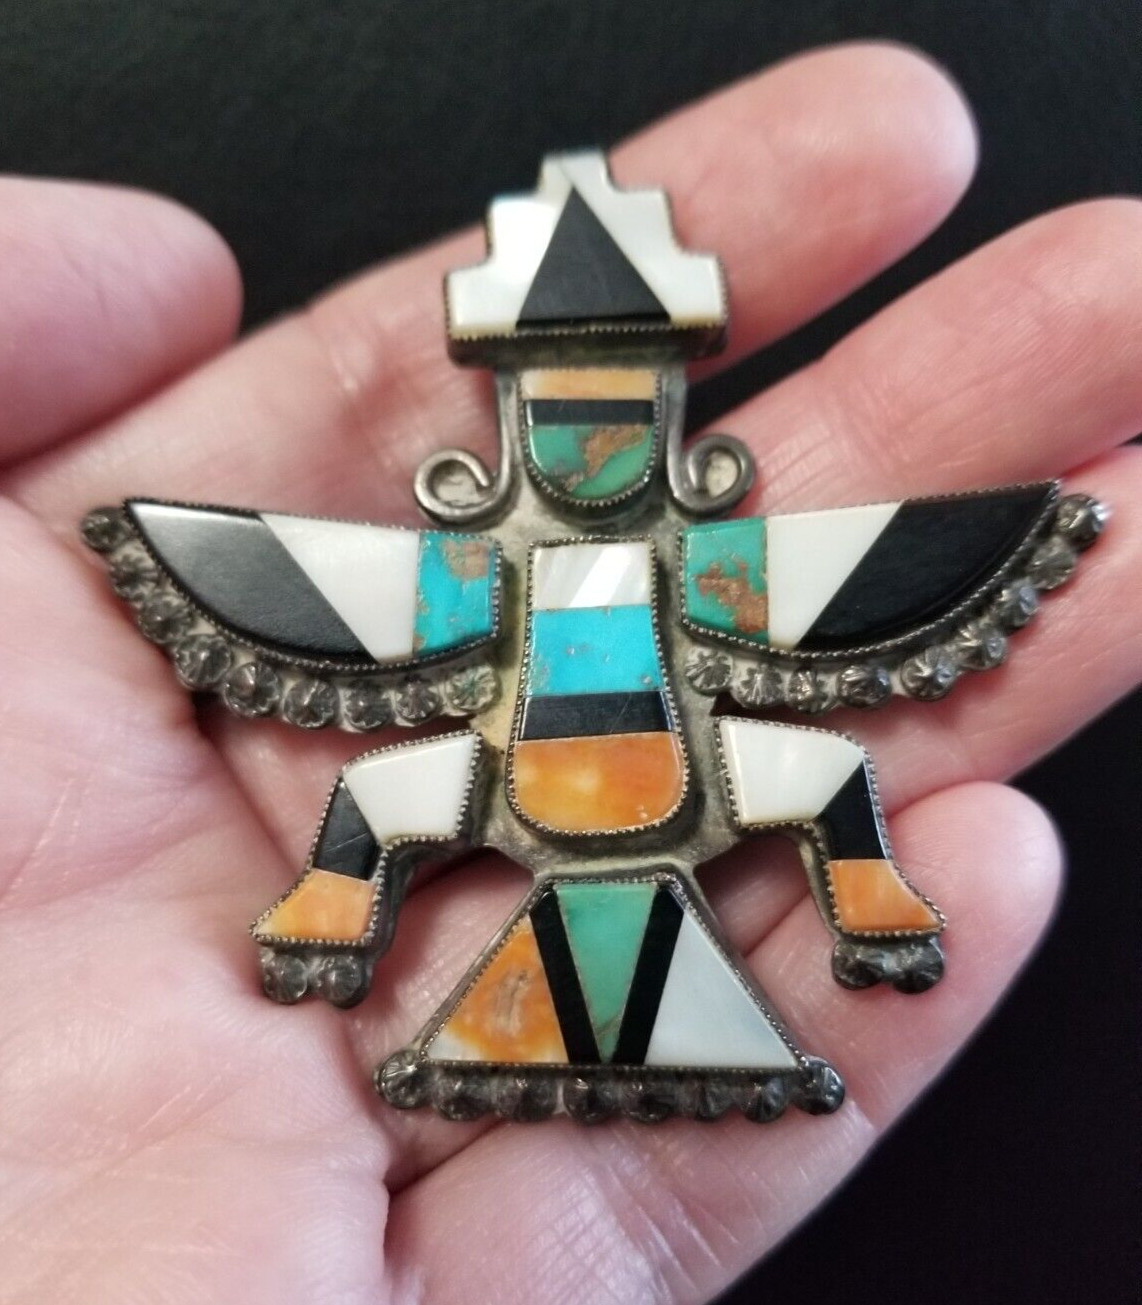 Vintage Zuni Knifewing Pin Brooch - Multi-stone Inlay Sterling Silver